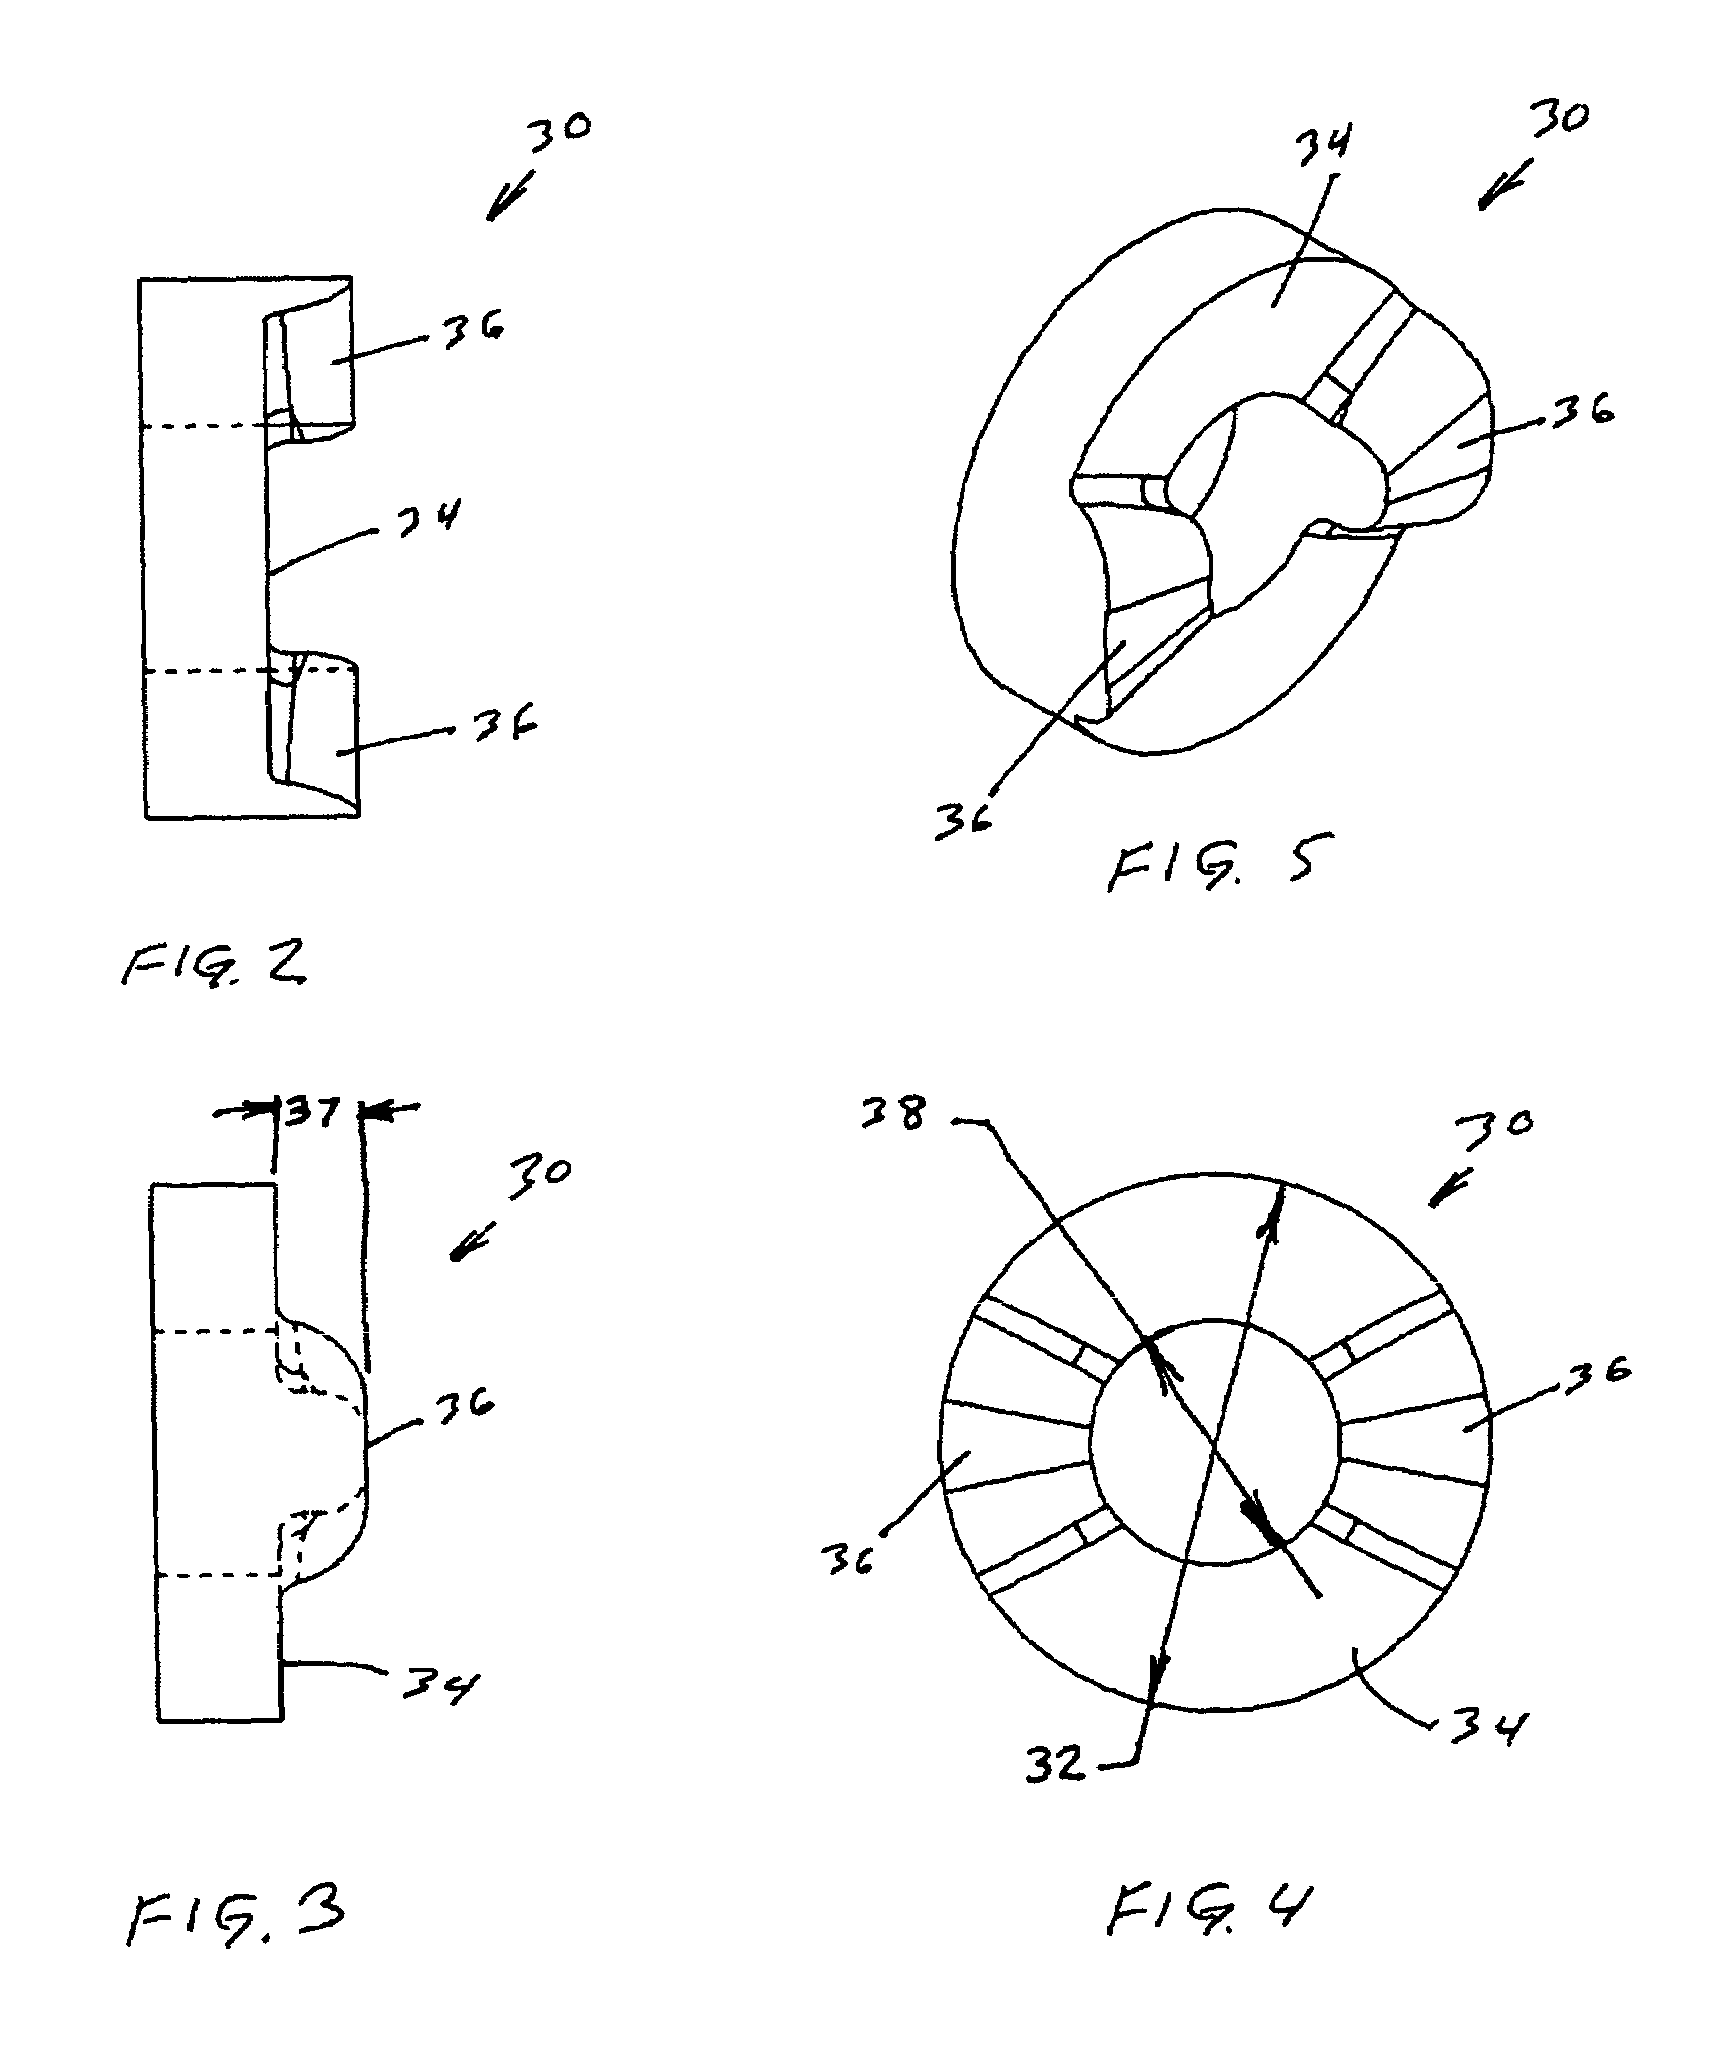 Endoscopic cutting instrument with axial and rotary motion